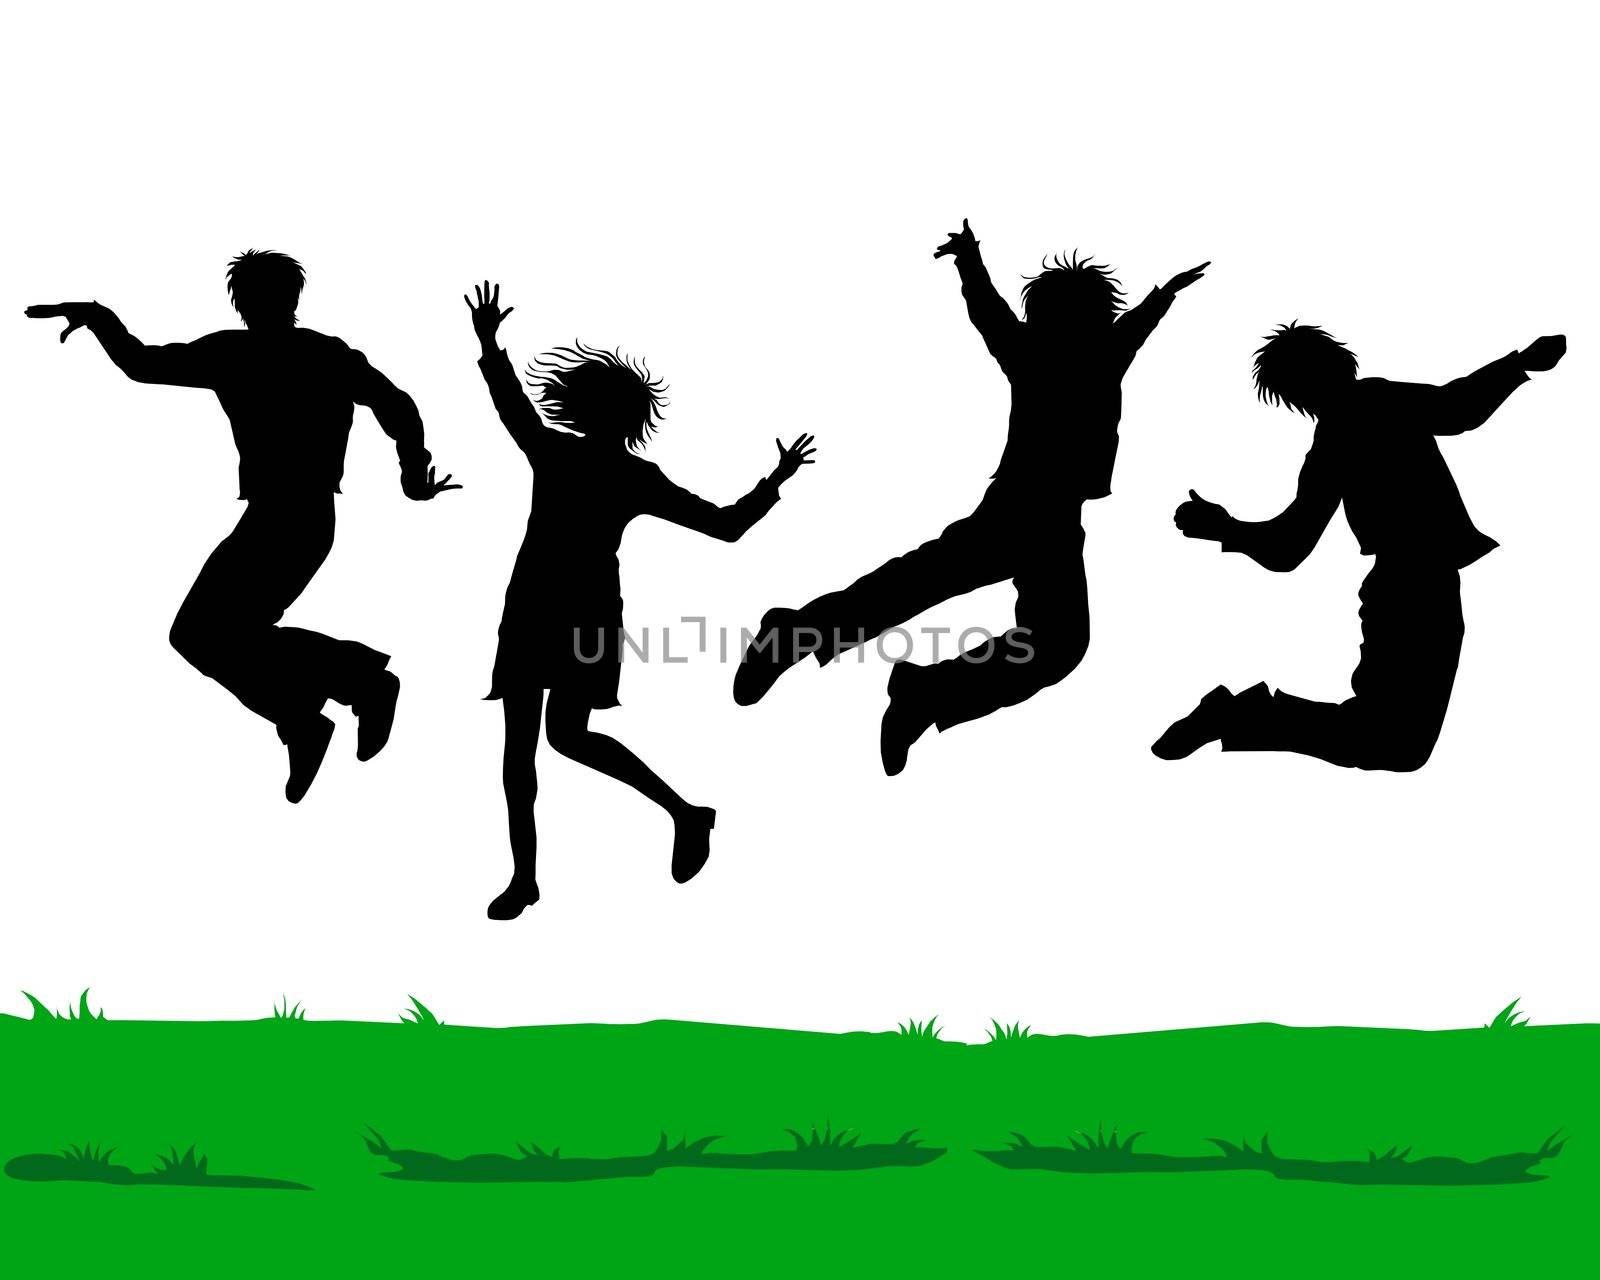 silhouettes of jumping people